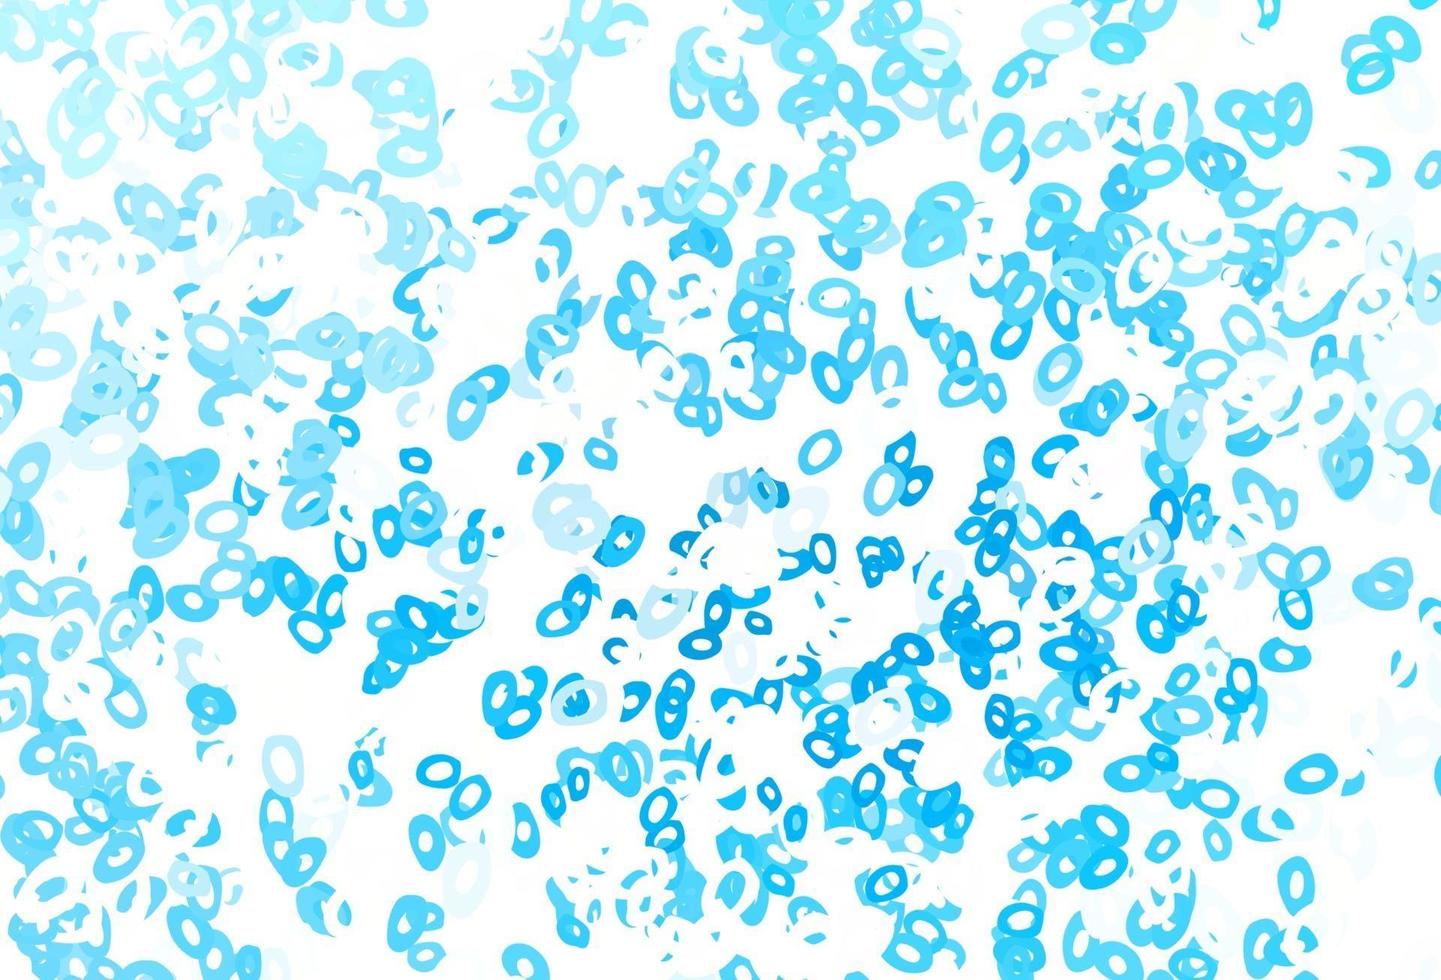 Light Blue, Red vector pattern with spheres.